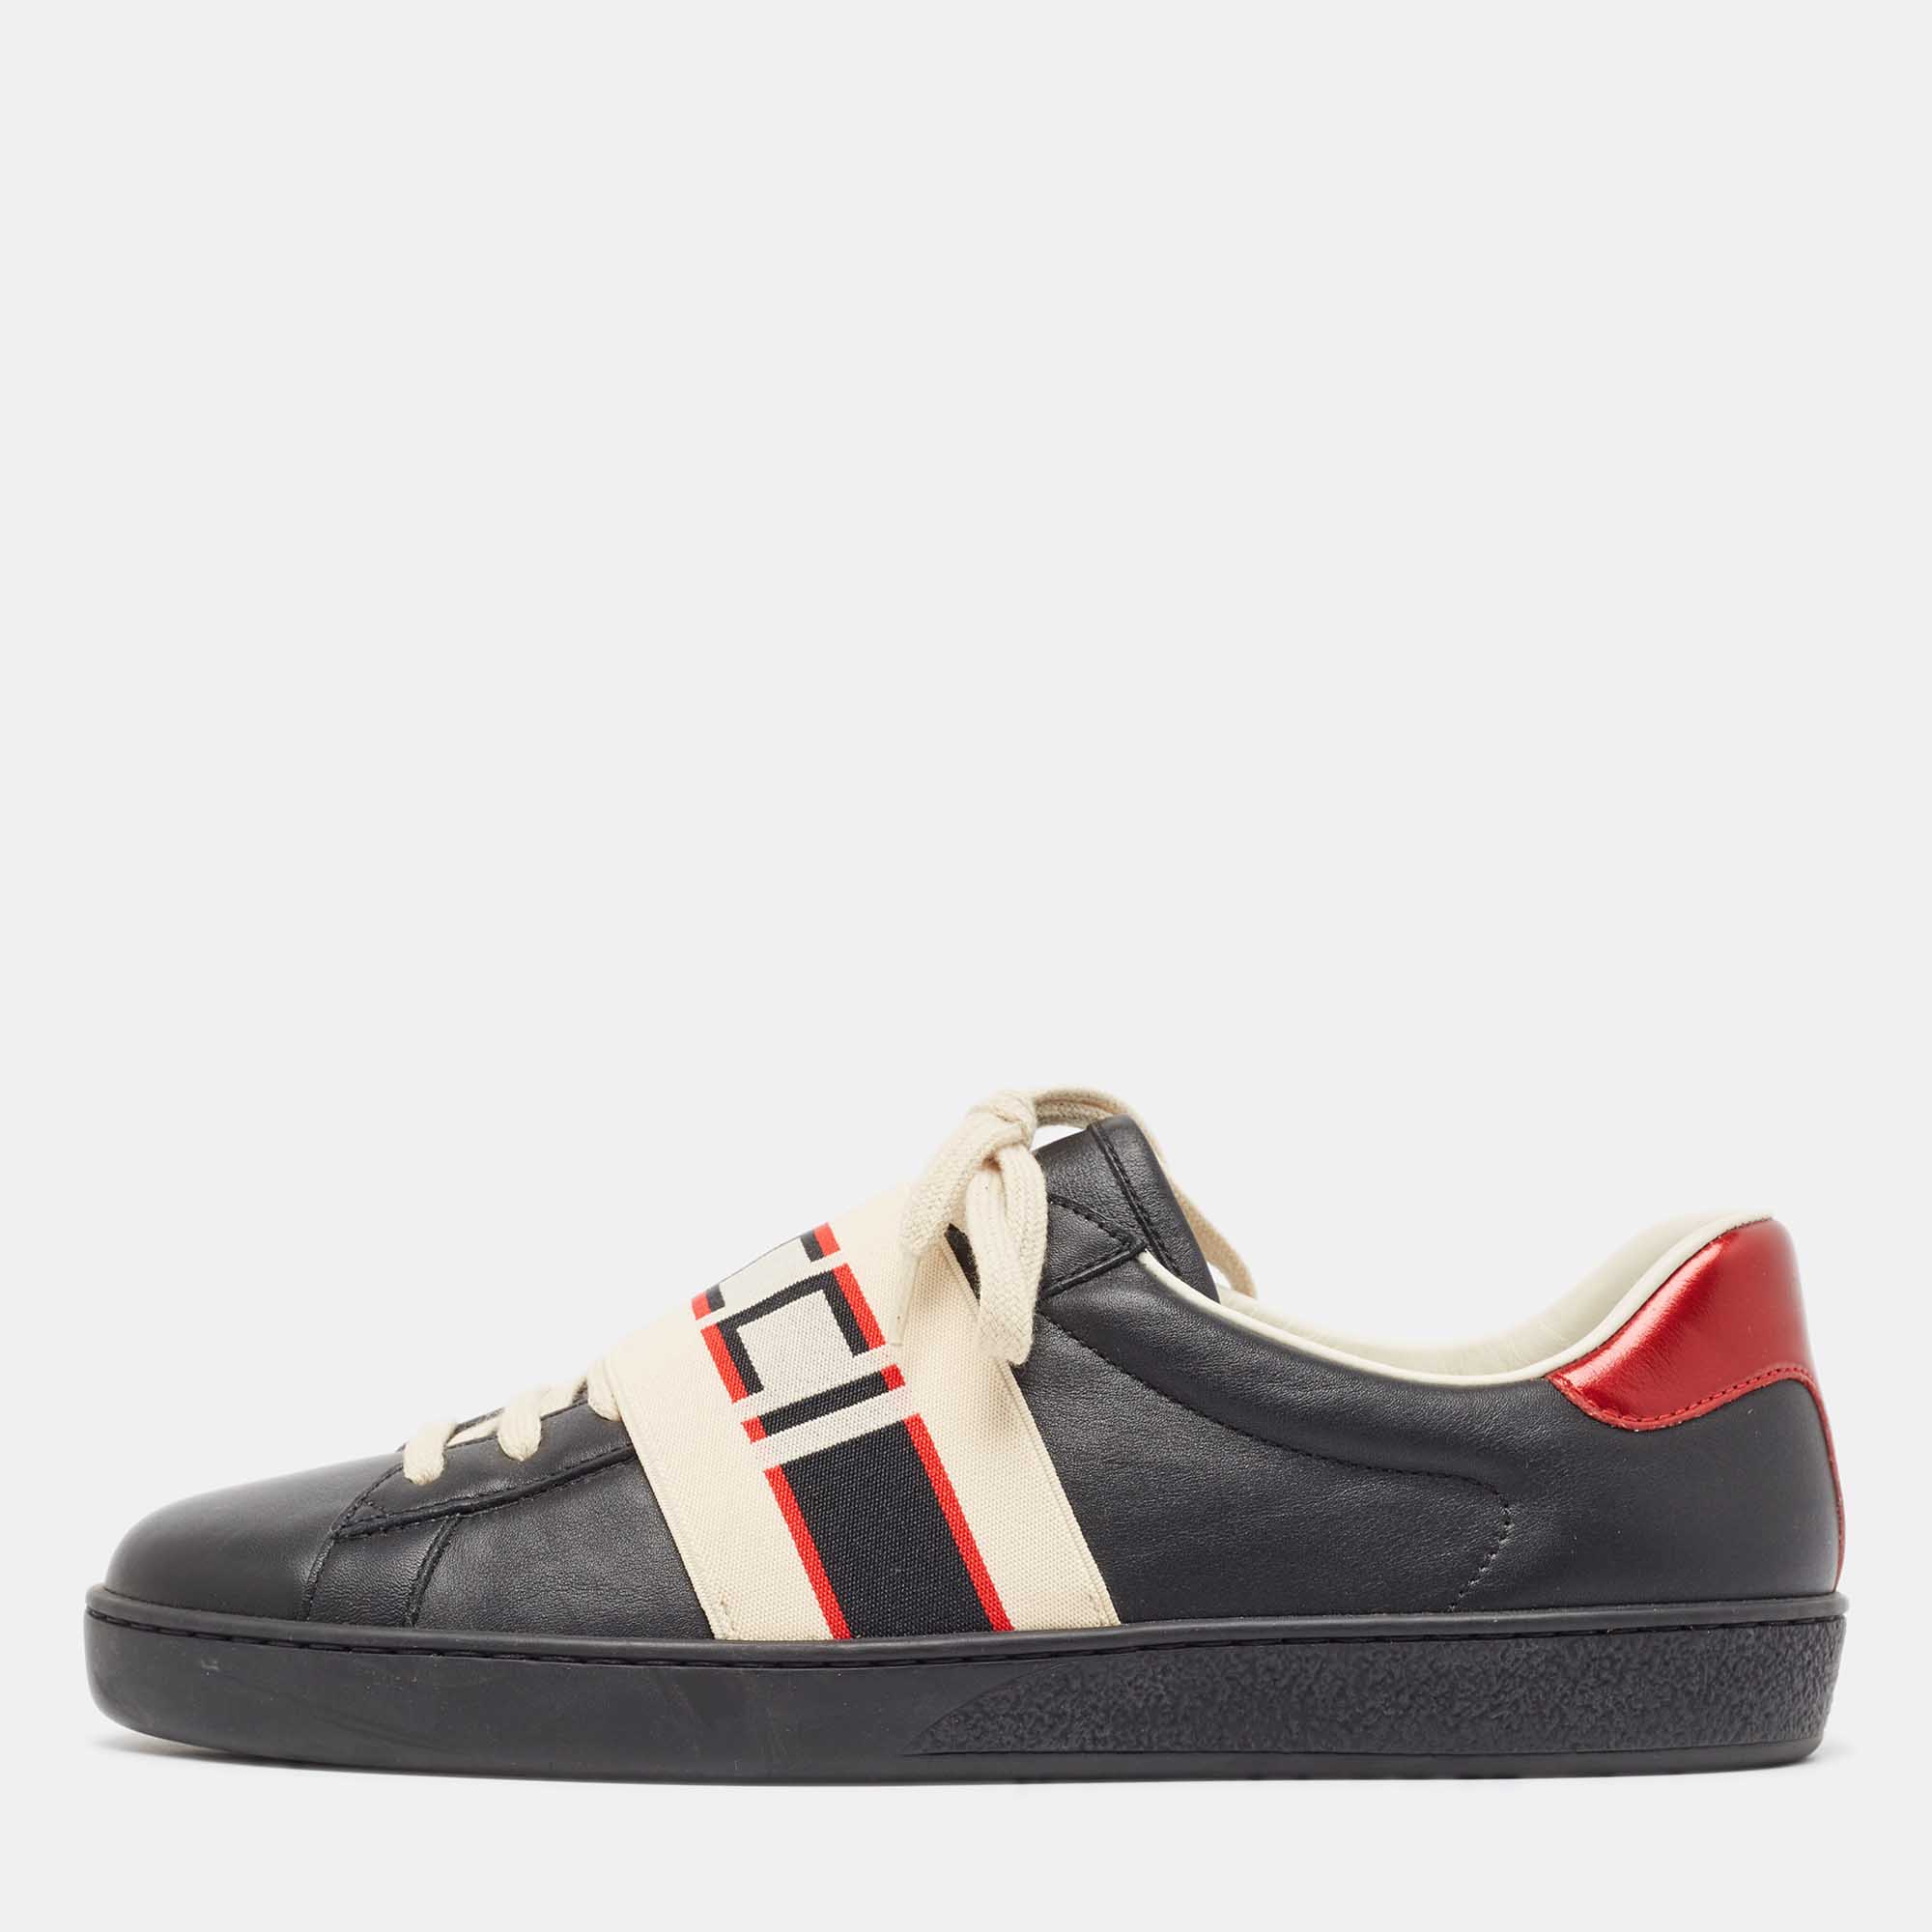 Pre-owned Gucci Black Leather And Stretch Band New Ace Logo Strap Low Top Sneakers Size 42.5